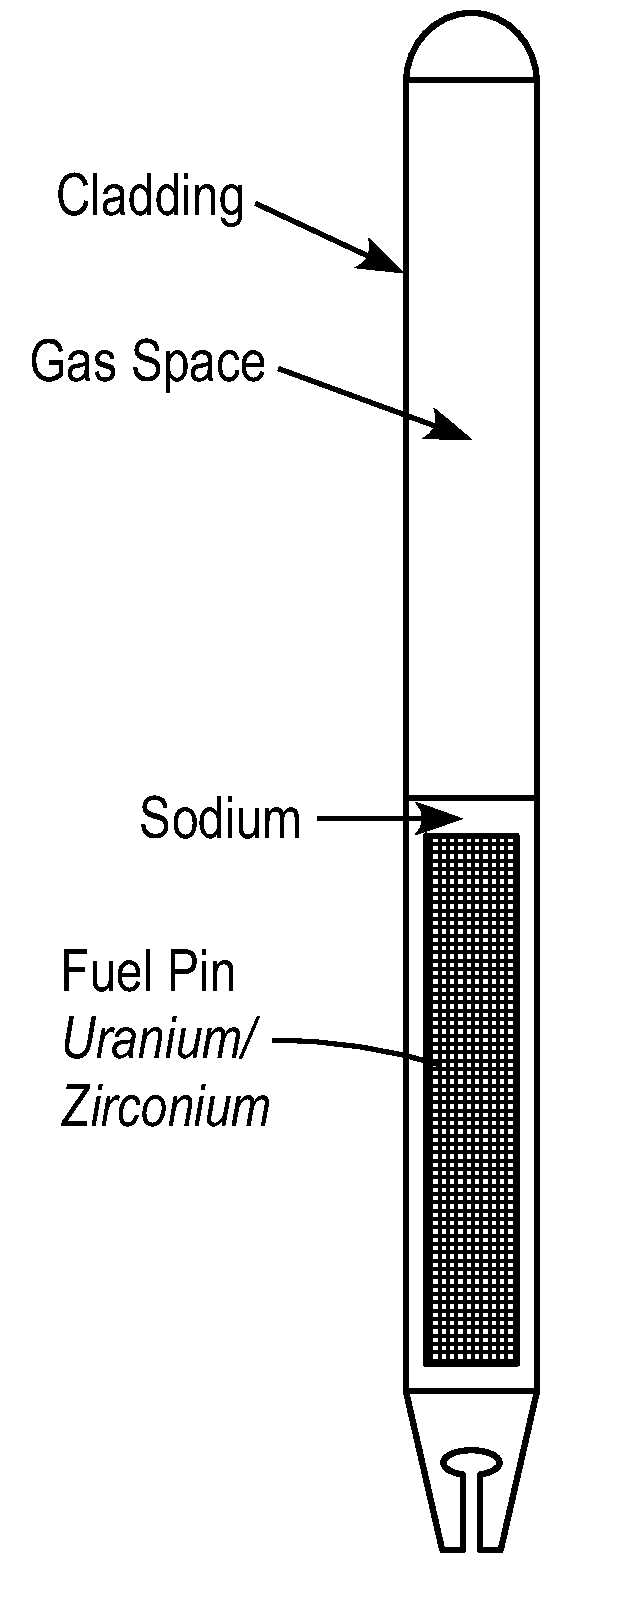 Particulate metal fuels used in power generation, recycling systems, and small modular reactors